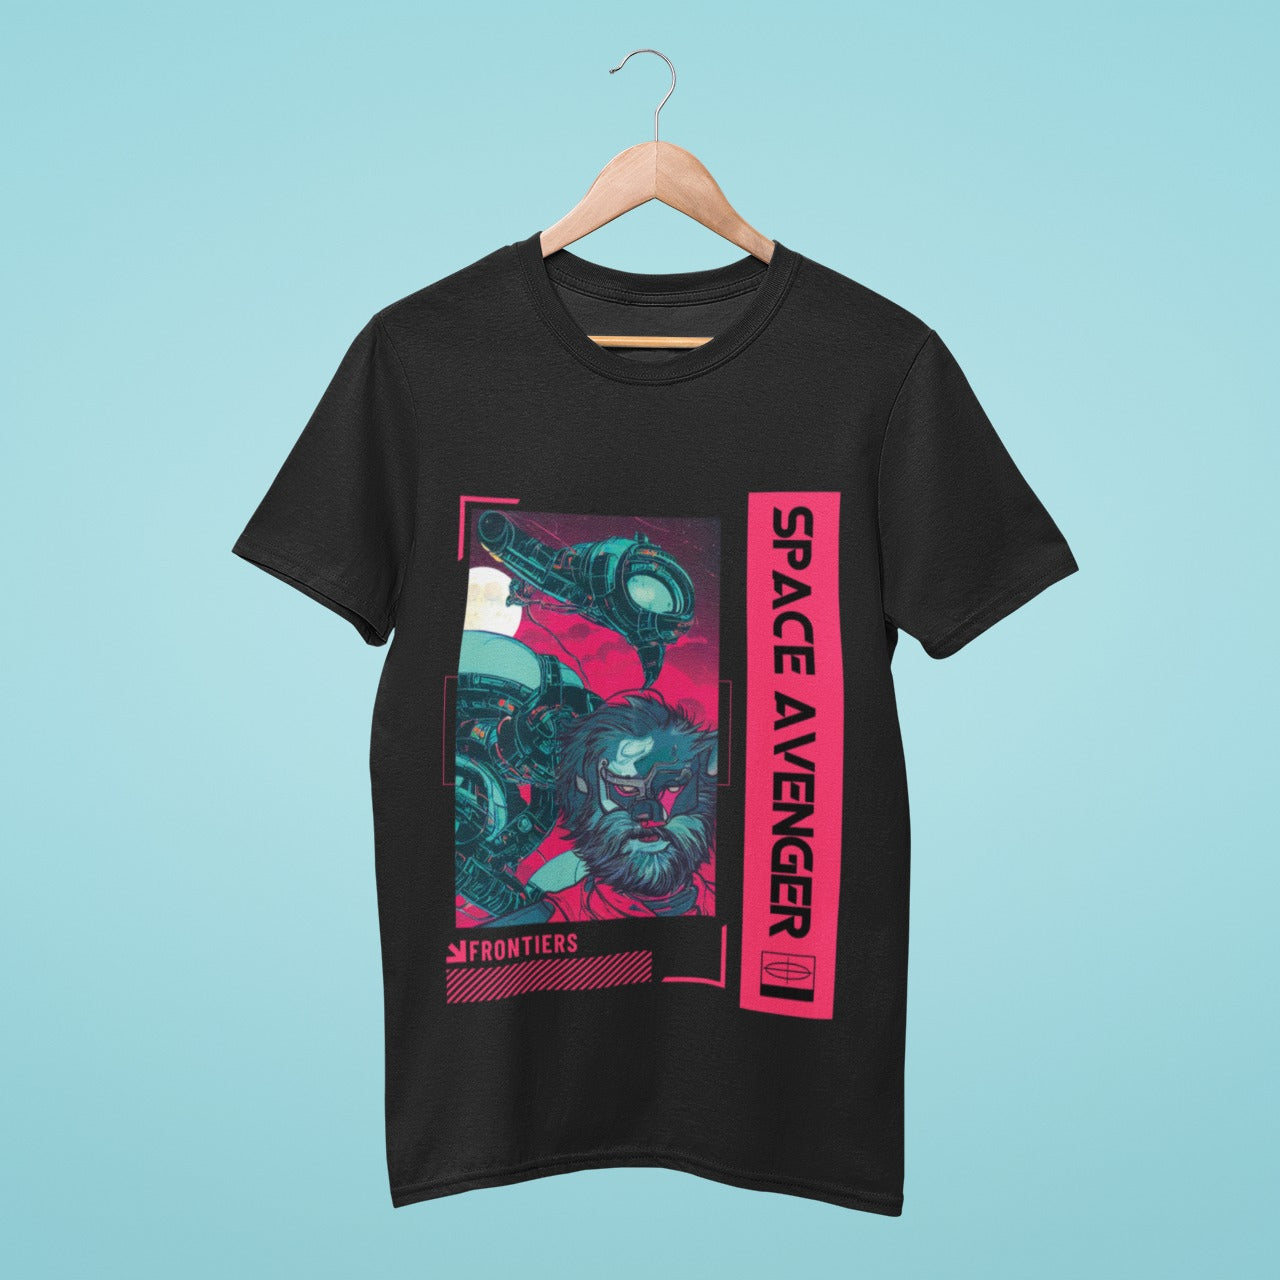 Looking for a bold and stylish look? Check out our black Space Avenger t-shirt featuring a sleek and futuristic spaceship design and a mysterious hairy-faced humanoid. With its eye-catching graphics and unique style, this shirt is perfect for any space enthusiast or sci-fi fan. Wear it to your next gaming or movie night and feel like a true space avenger!